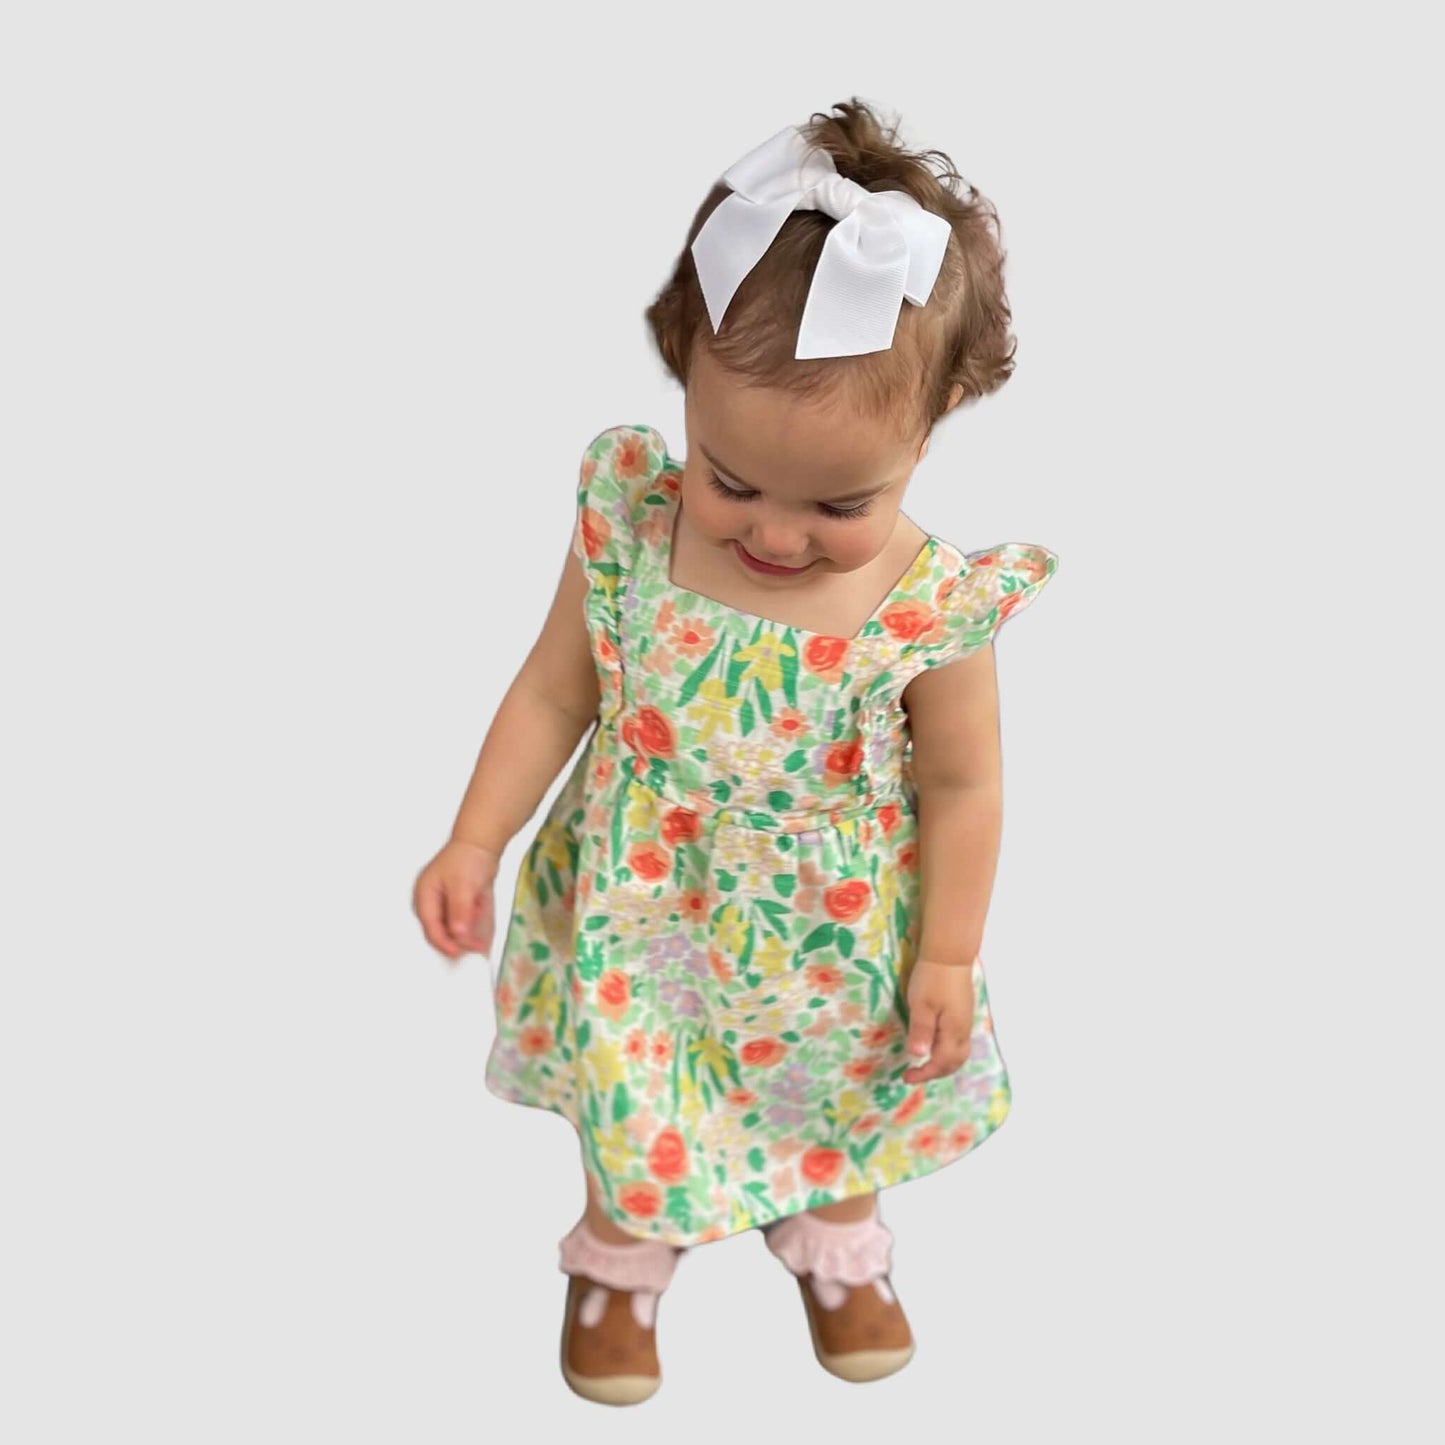 Toddler wearing floral dress and white grosgrain sailor bow with alligator clip